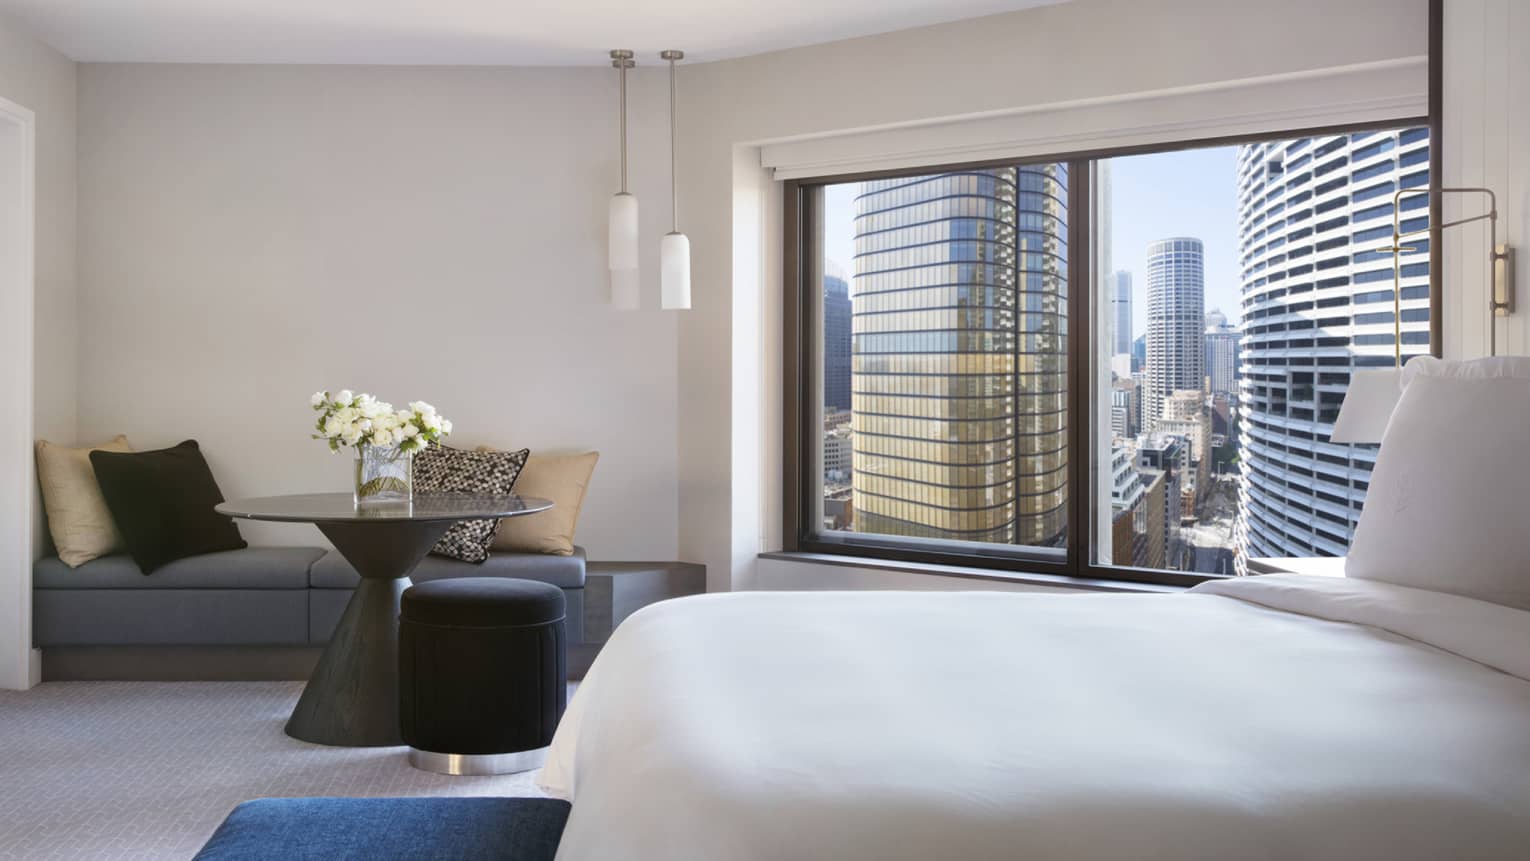 Premier City Rooms at Four Seasons Hotel Sydney feature sleek interiors and city views